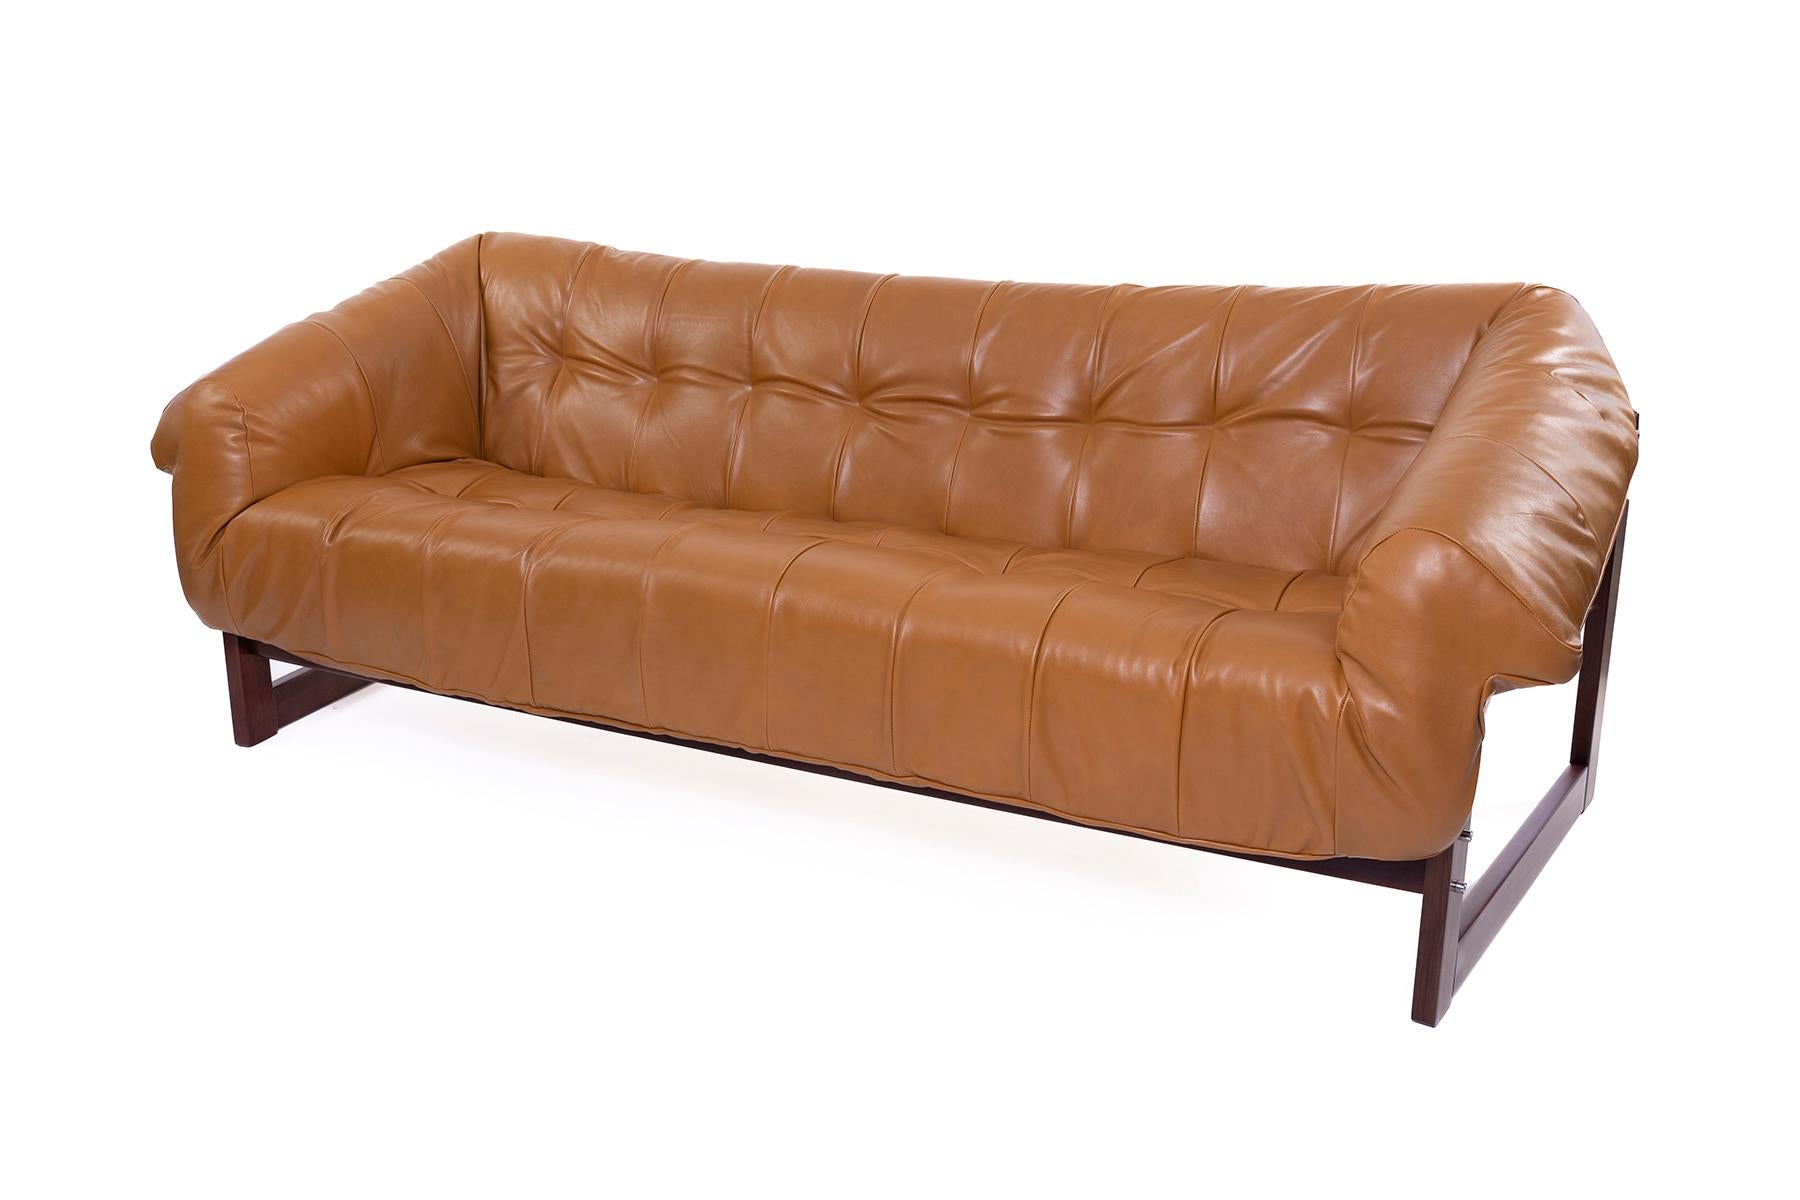 Brazilian Percival Lafer 1970s sling sofa newly upholstered in Maharam cognac leather. Rosewood frasme has been newly finished. Sits extremely comfortably!